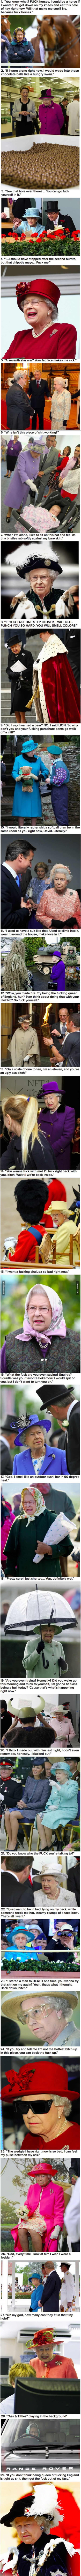 Just Some Queen Memes 9gag